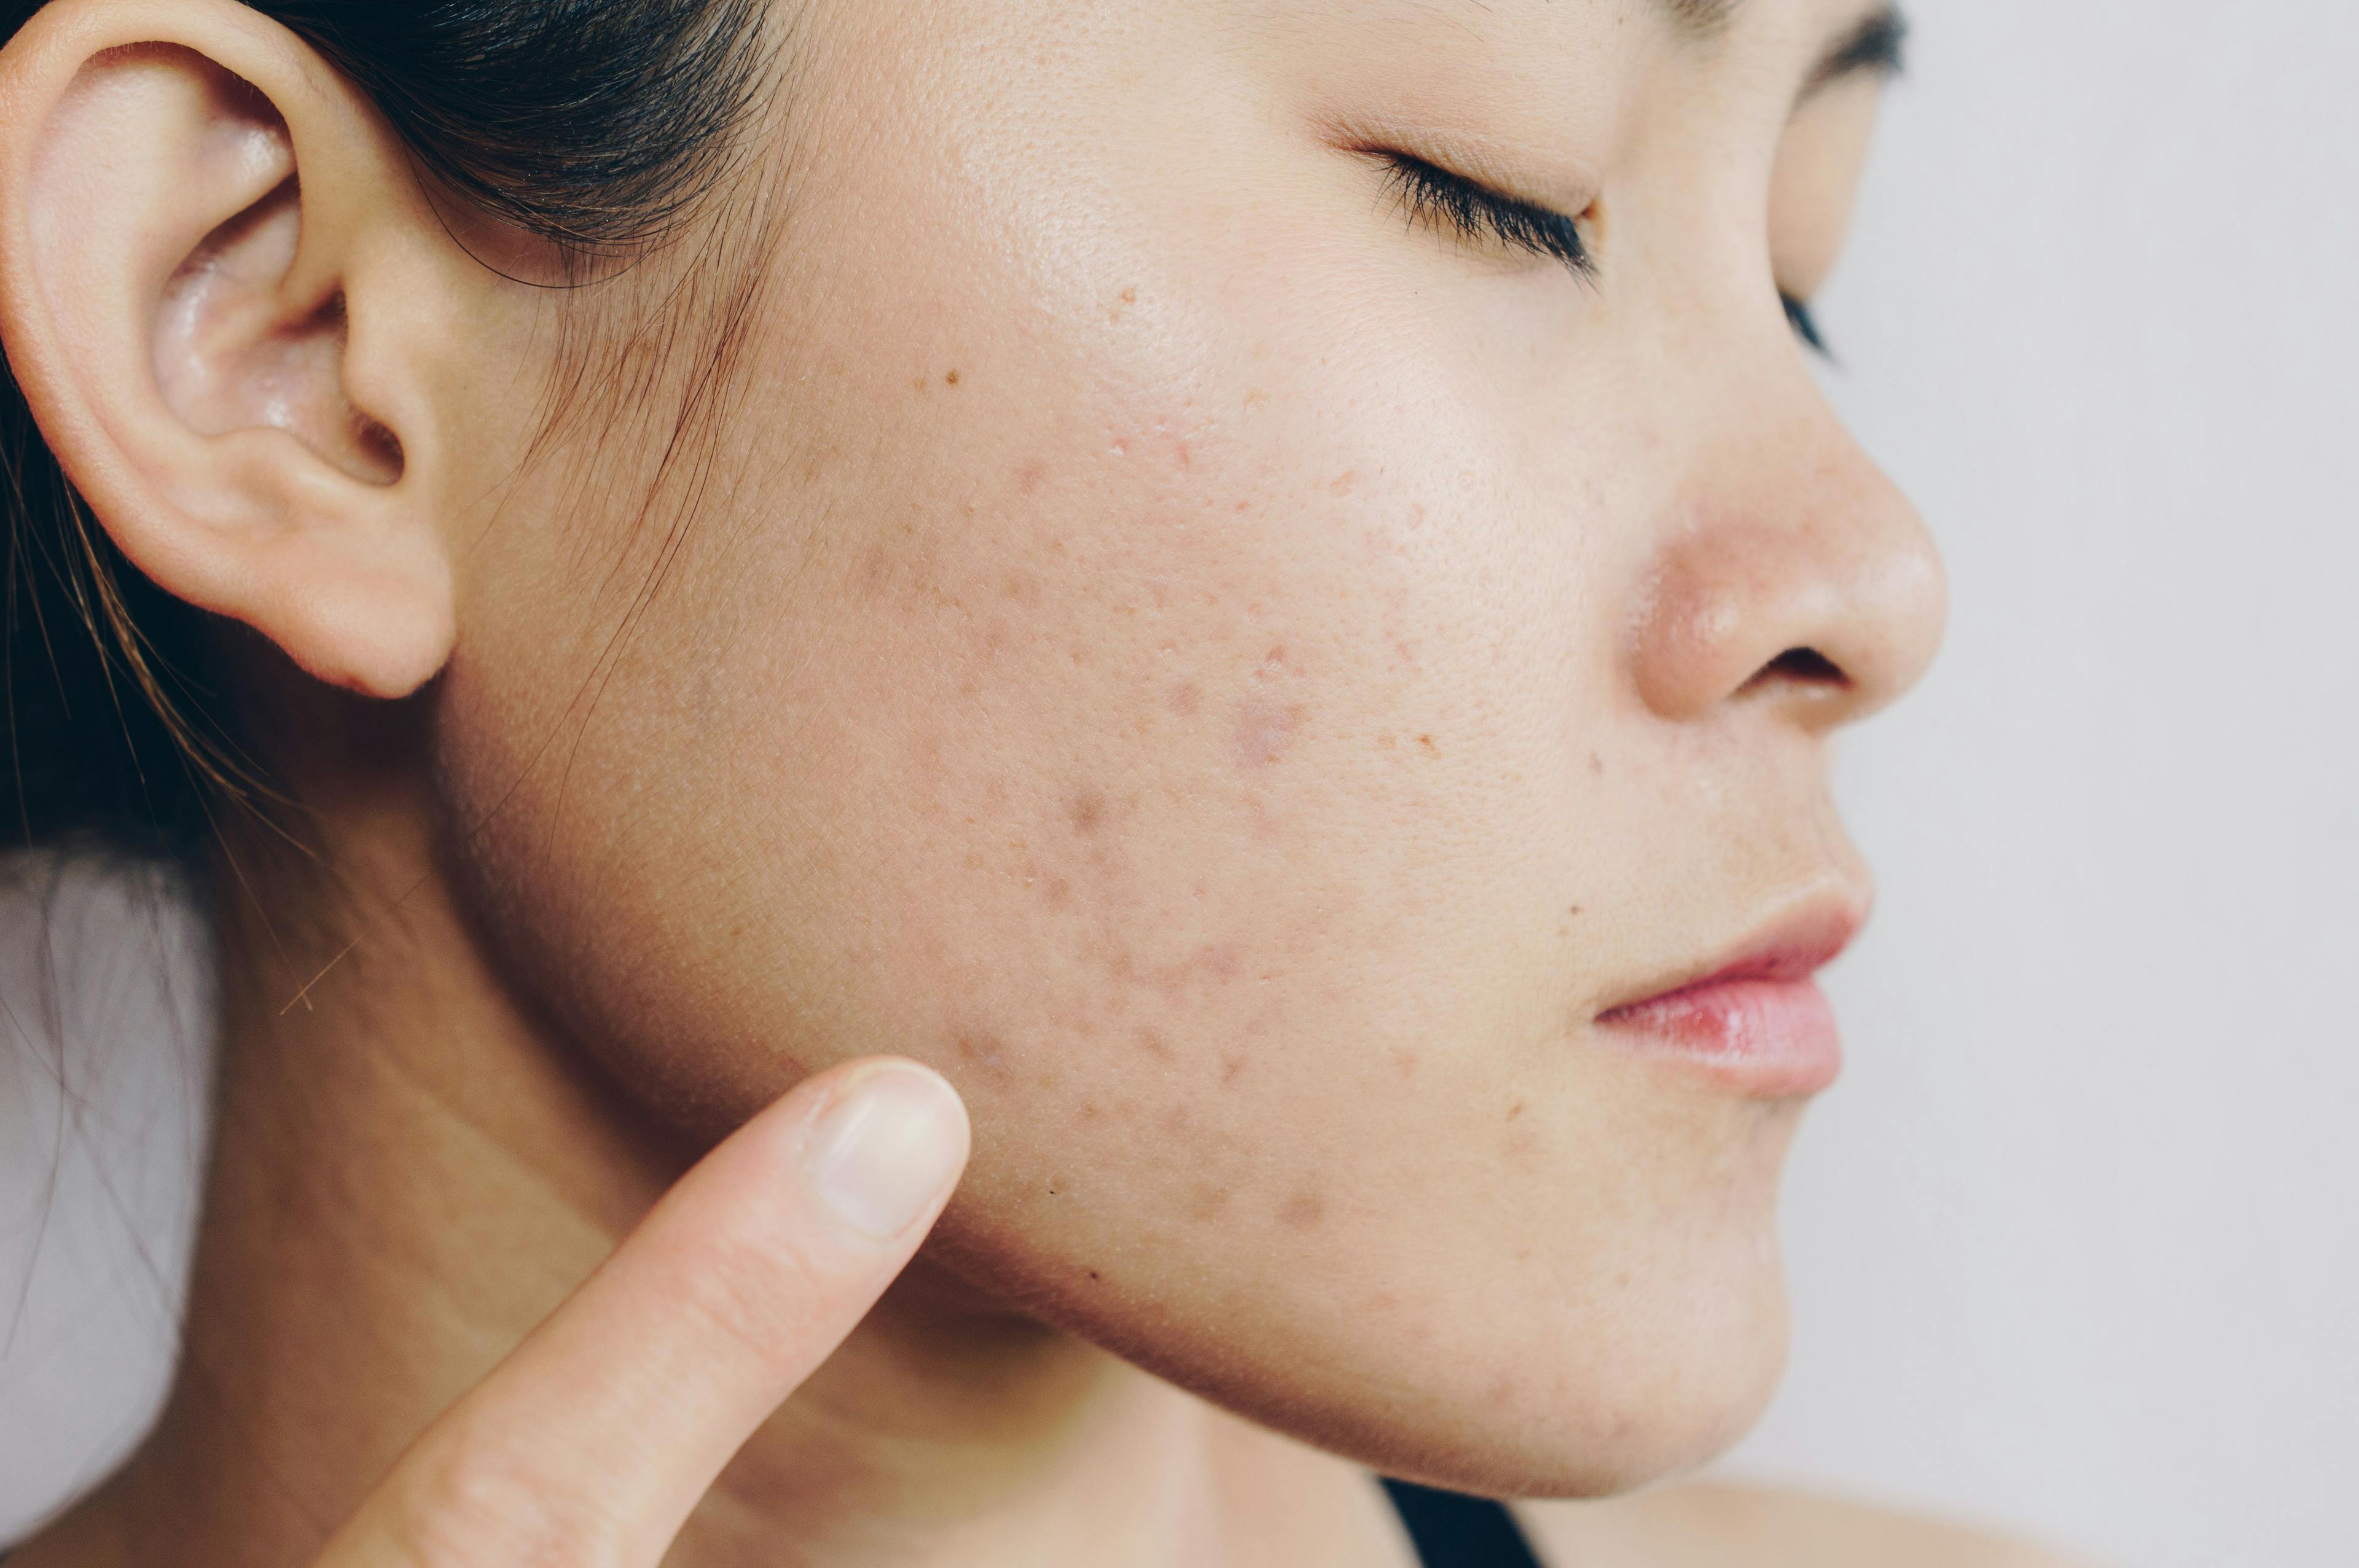 Dermatologic differences in a diverse population